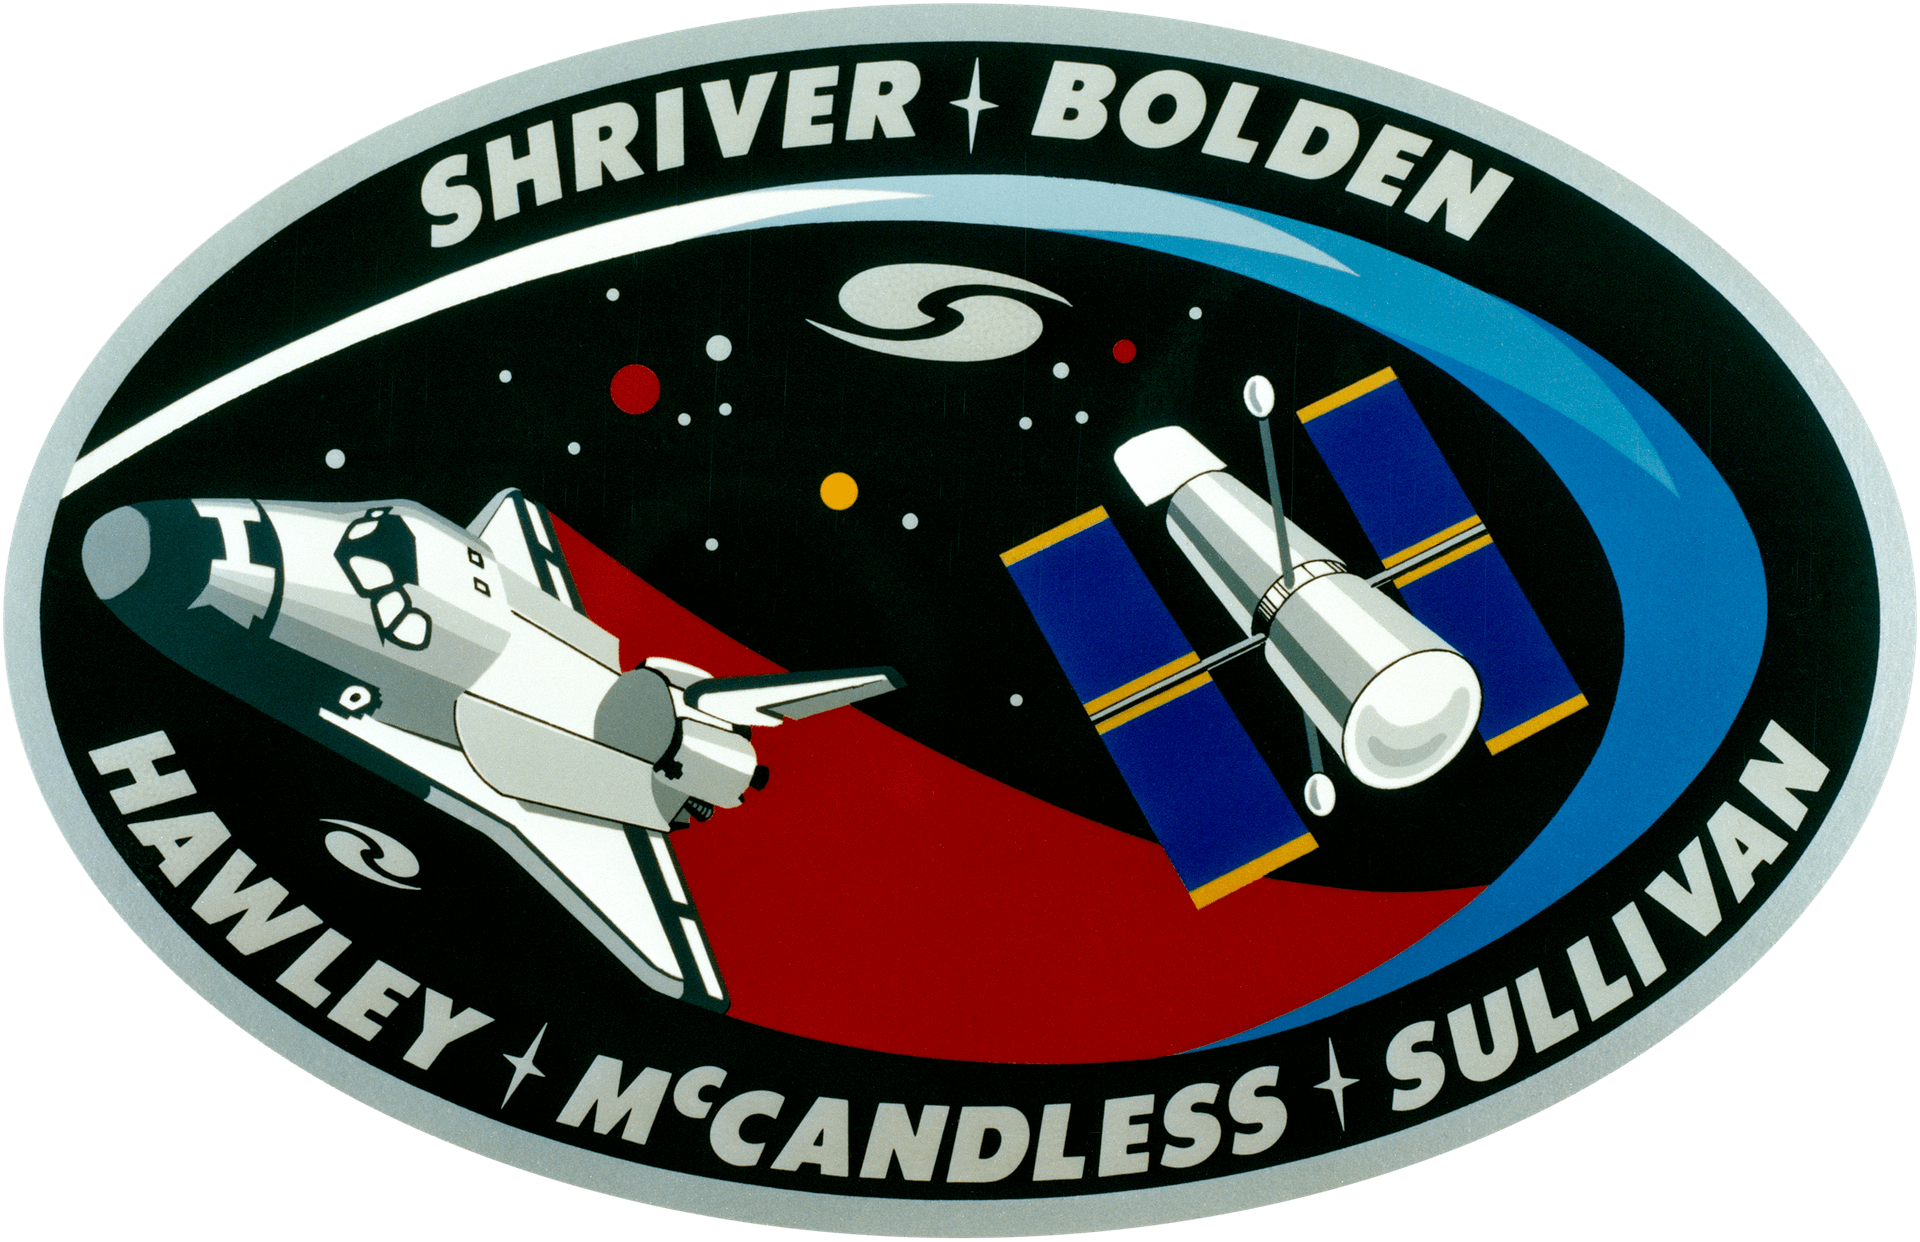 Mission patch for STS-31